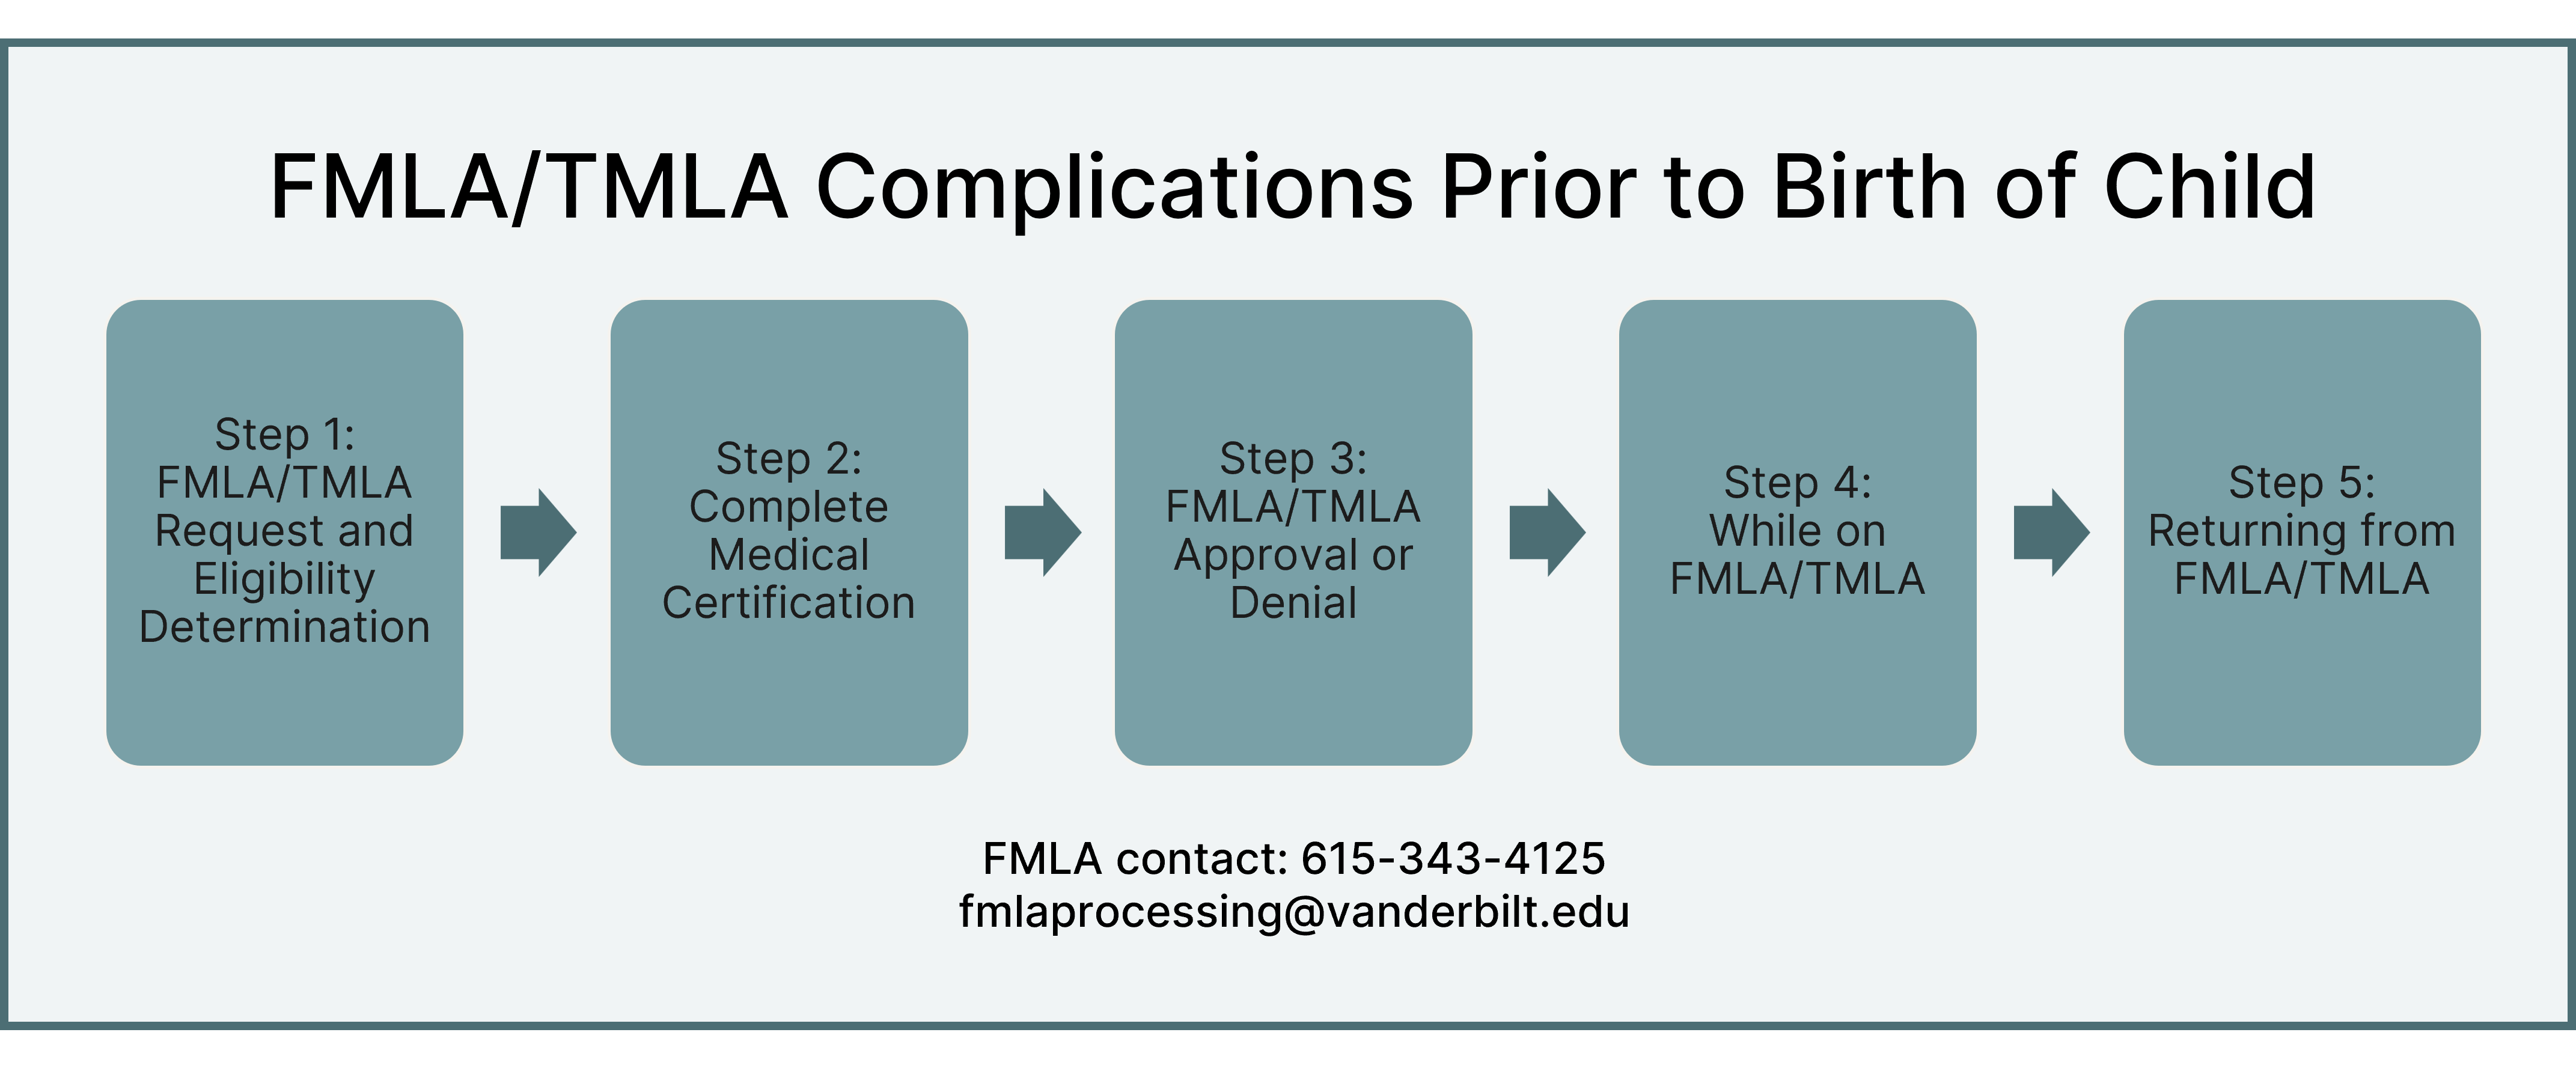 chart showing FMLA for complications prior to birth of a child